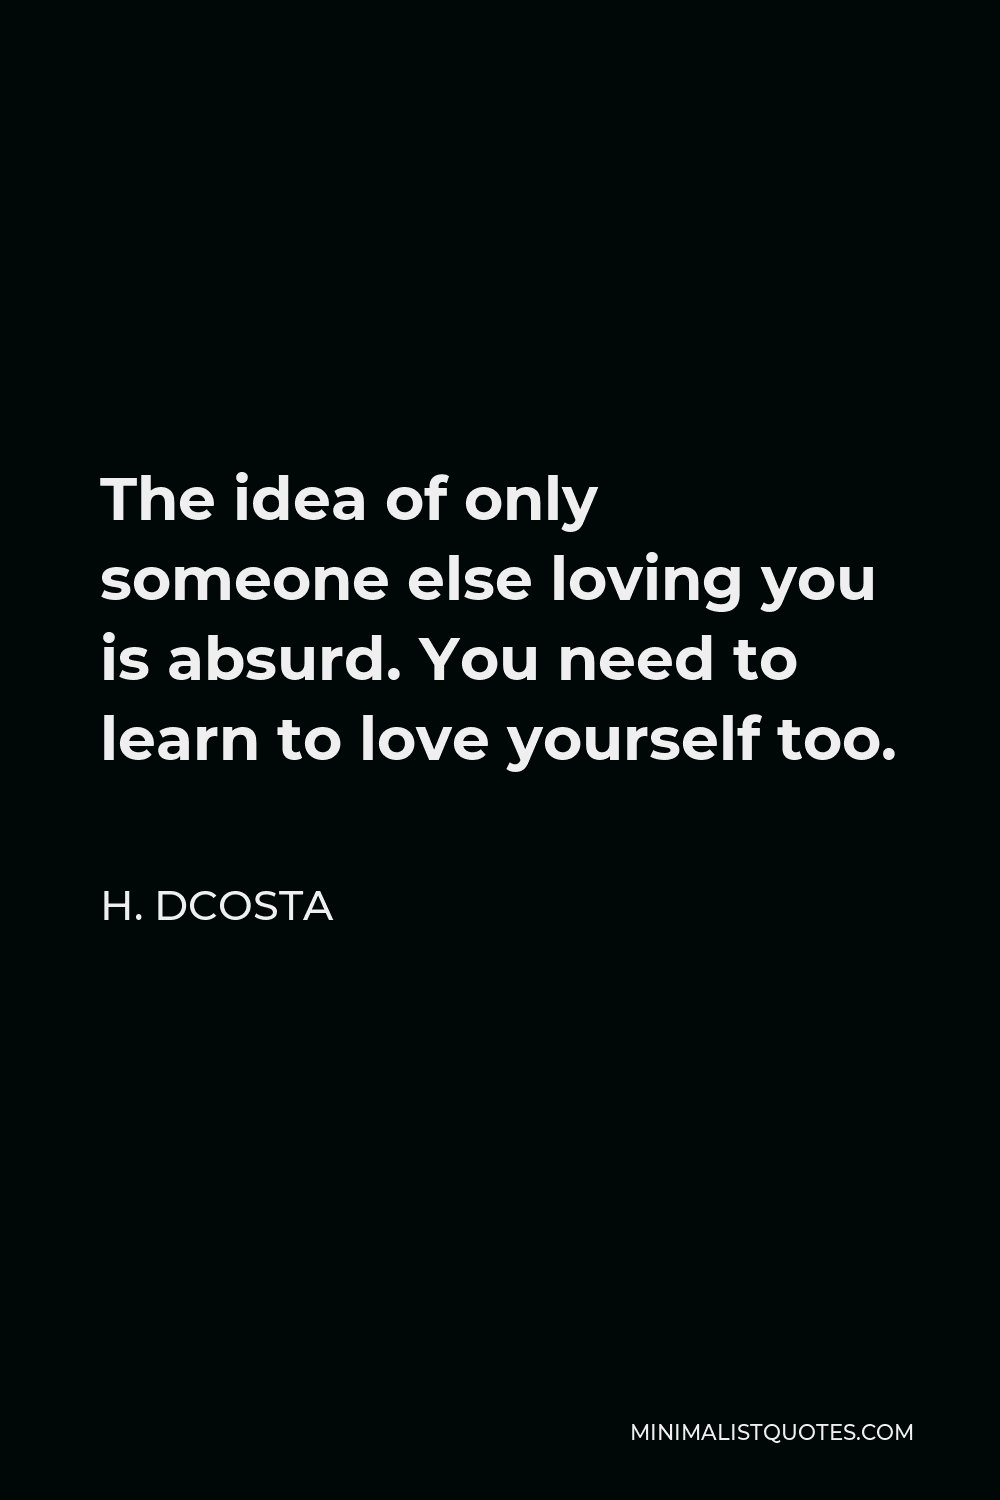 H Dcosta Quote The Idea Of Only Someone Else Loving You Is Absurd You Need To Learn To Love Yourself Too